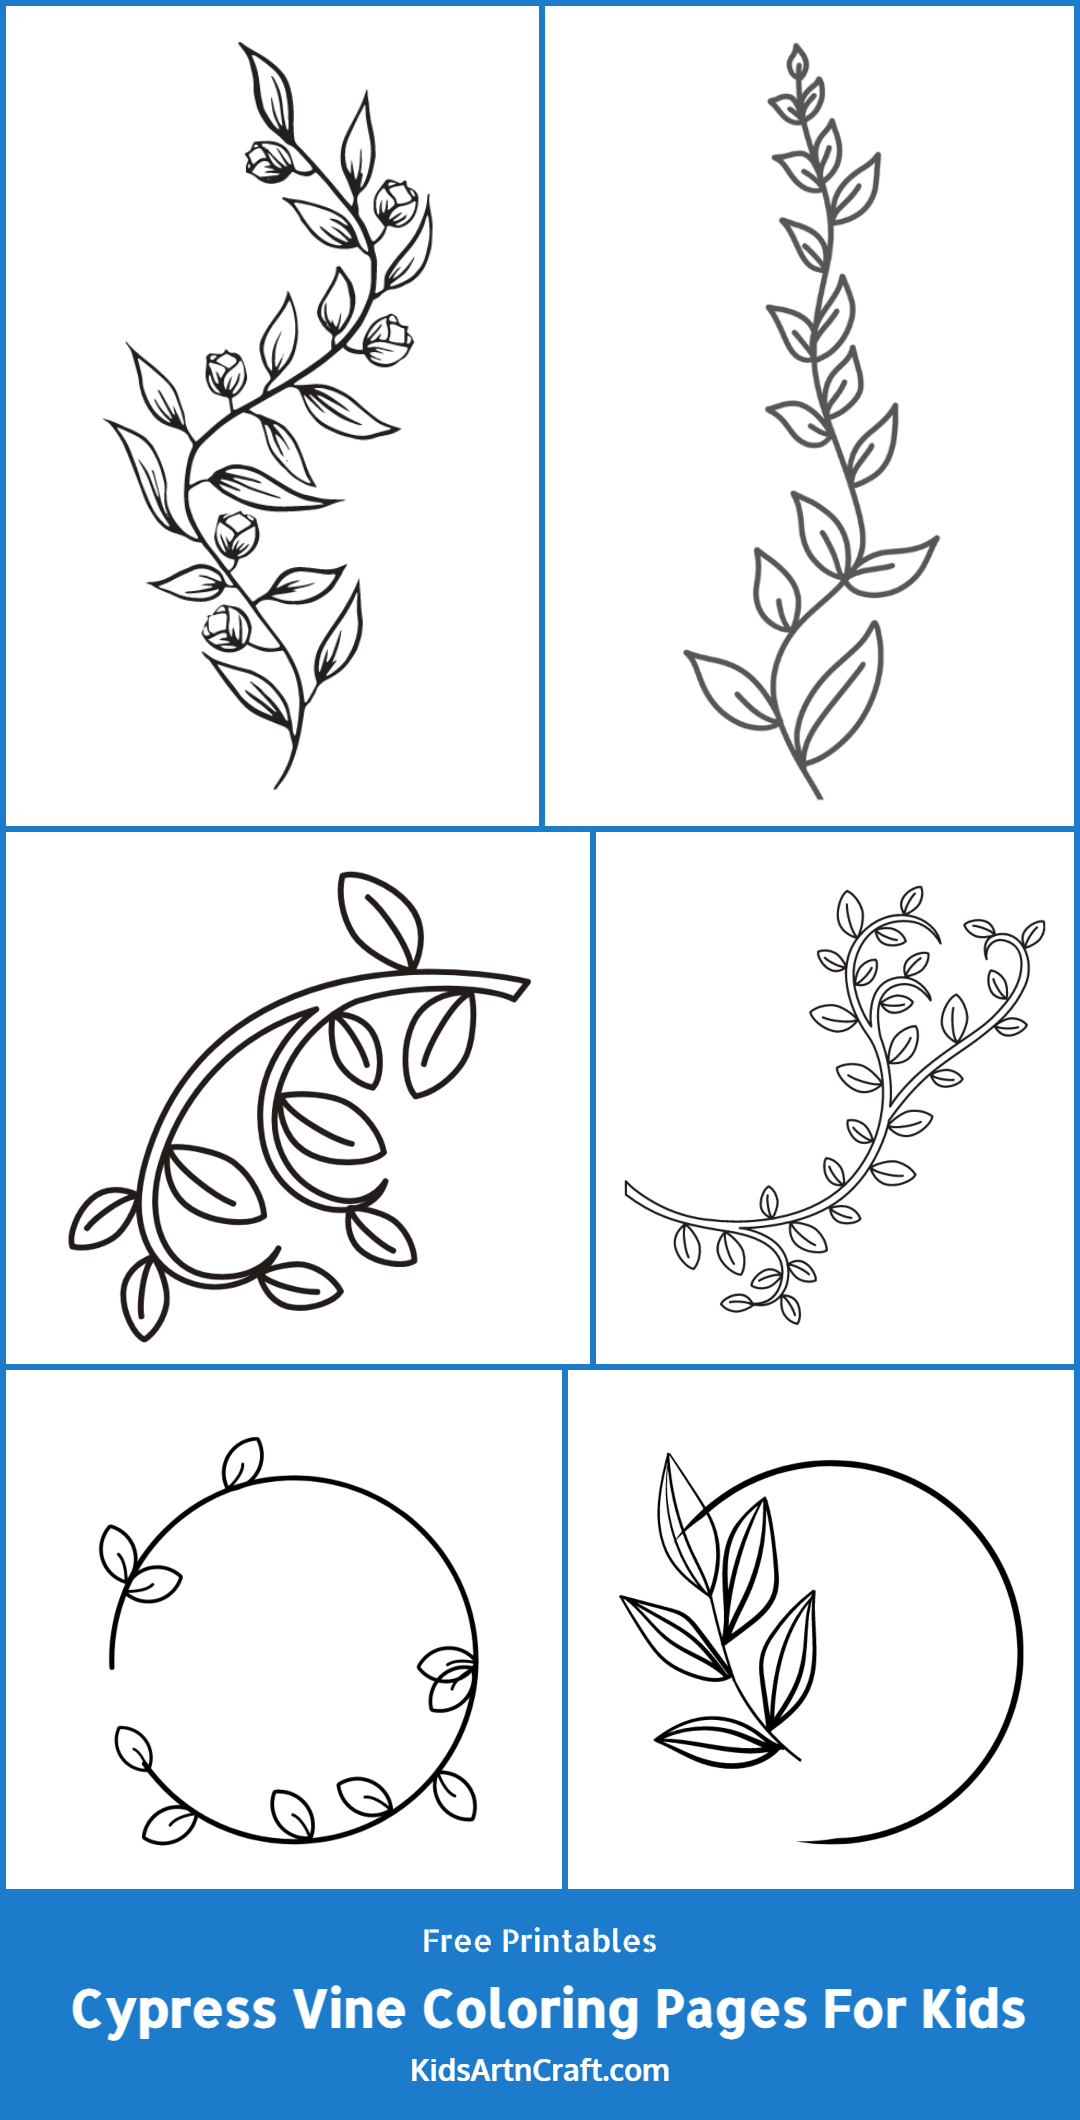 Cypress Vine Coloring Pages For Kids – Free Printables